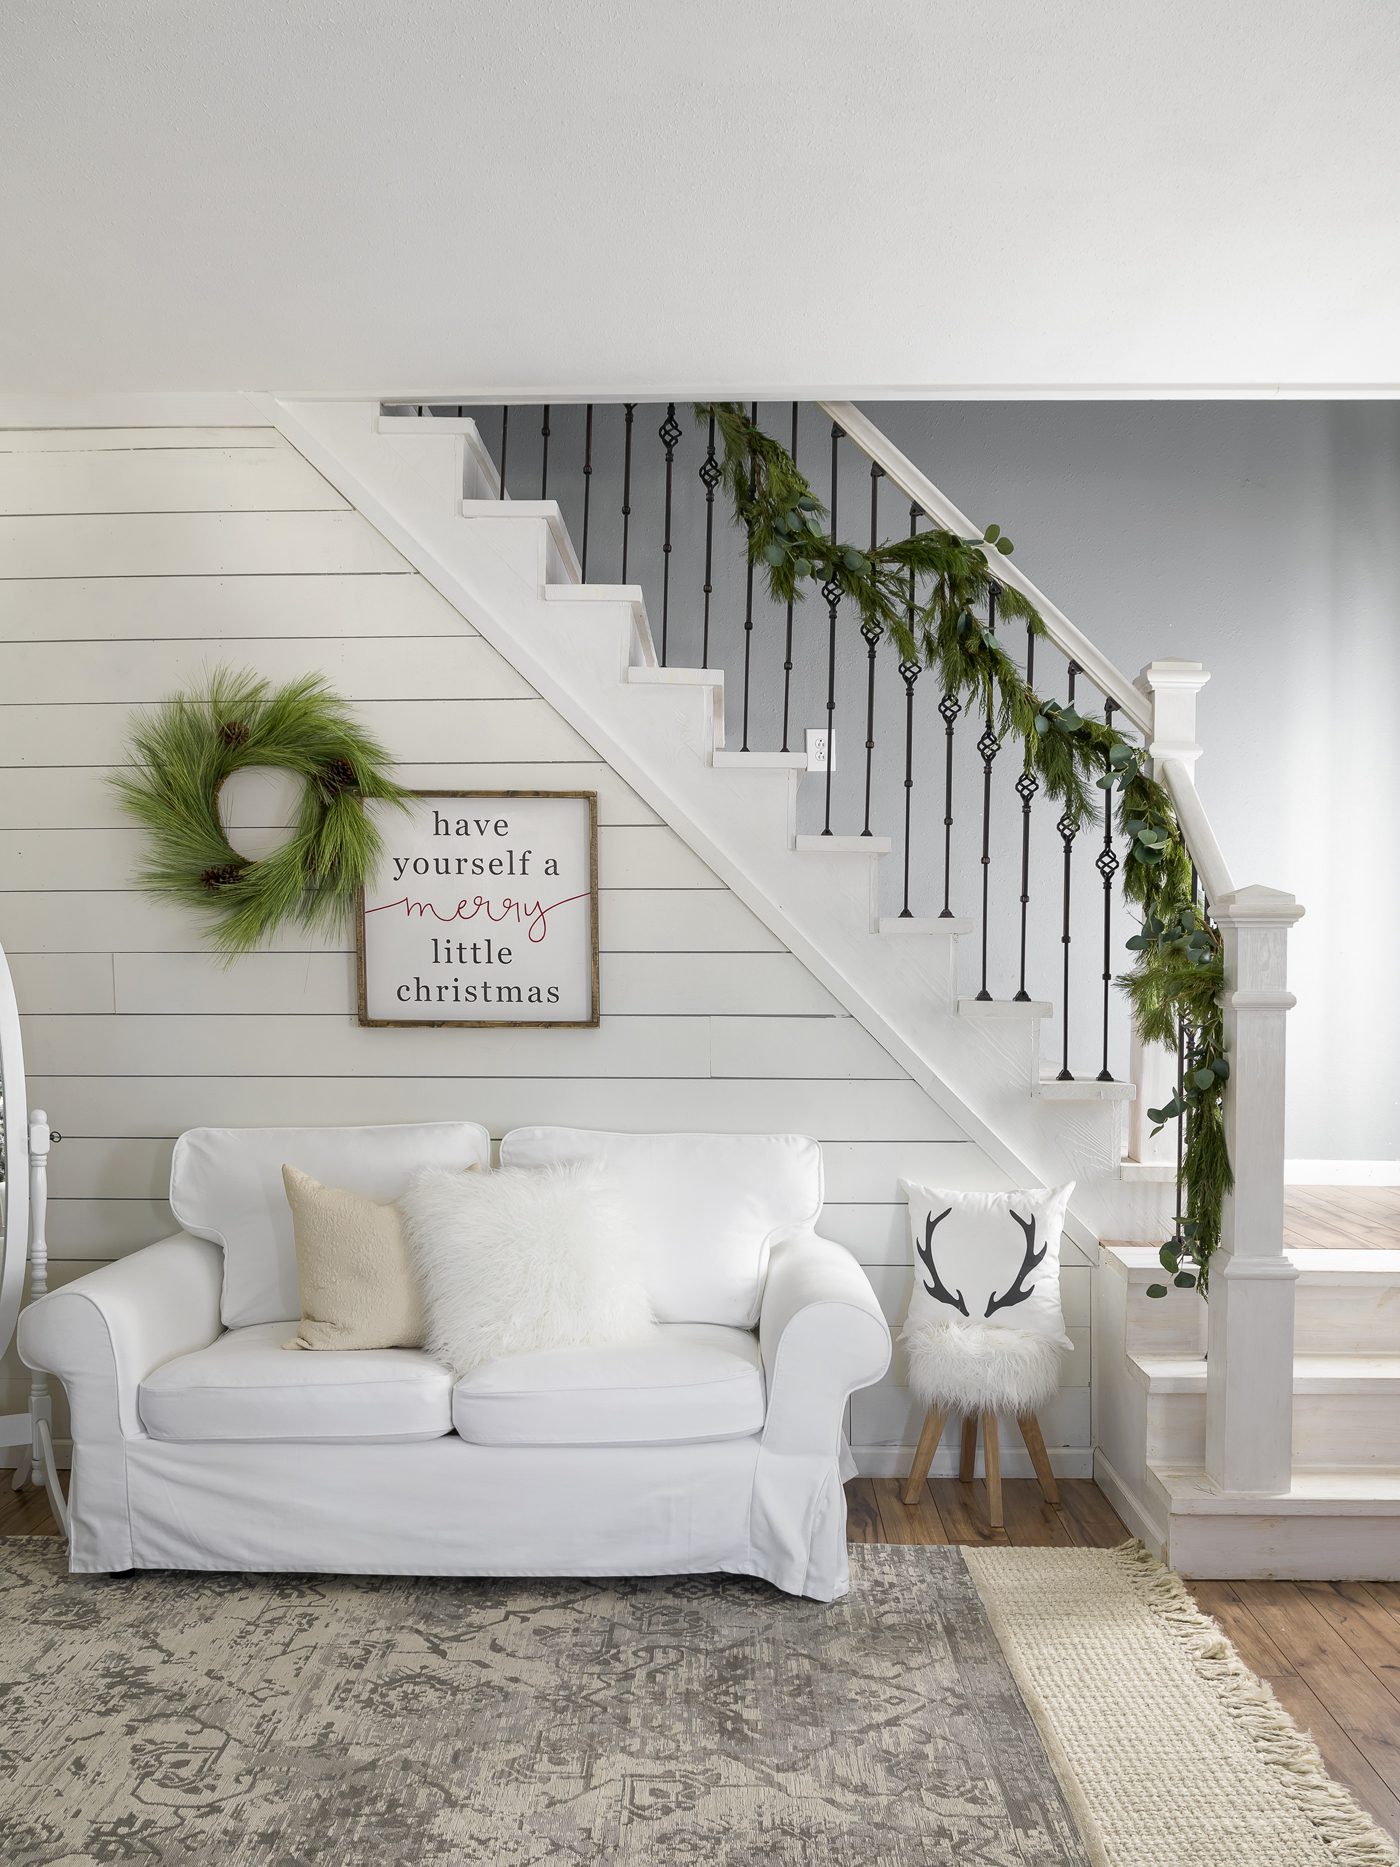 Small, white couch beneath a garland-adorned staircase and white shiplap wall, perfect for the neutral Christmas look.